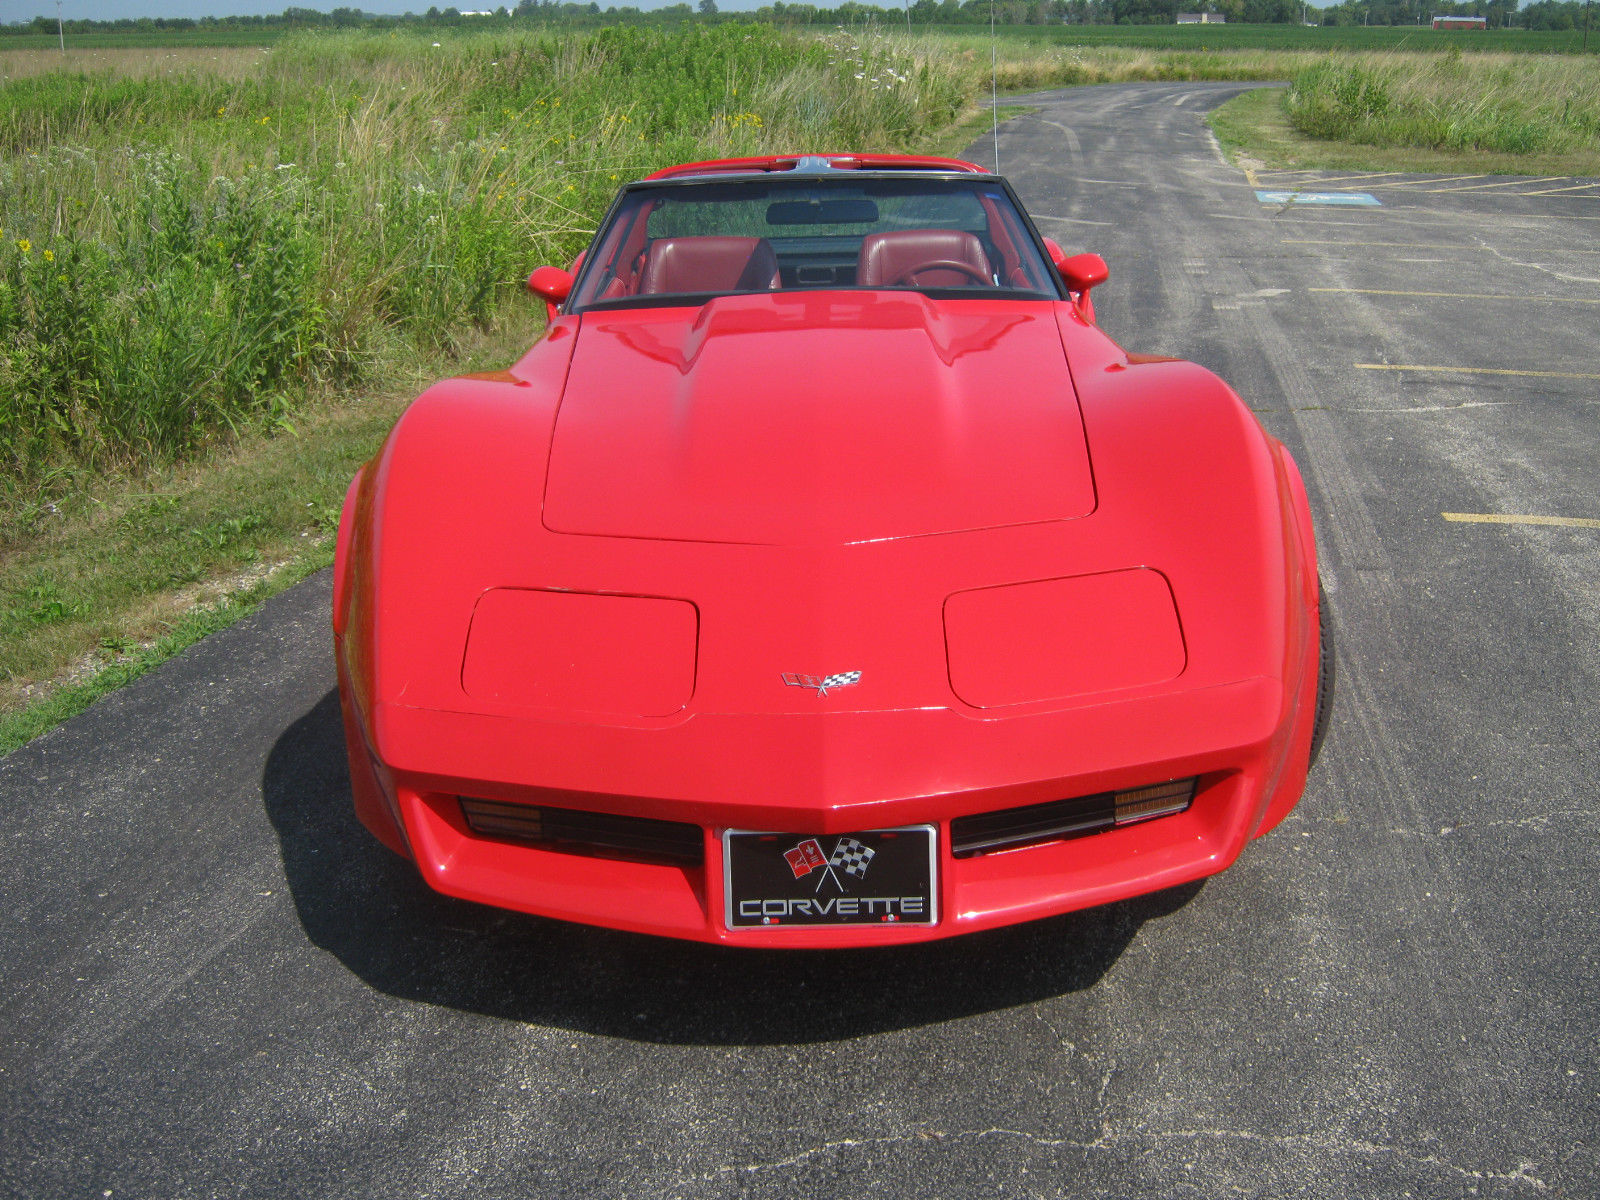 1979 Red Corvette with 1980 Front end and Rear Bumper2